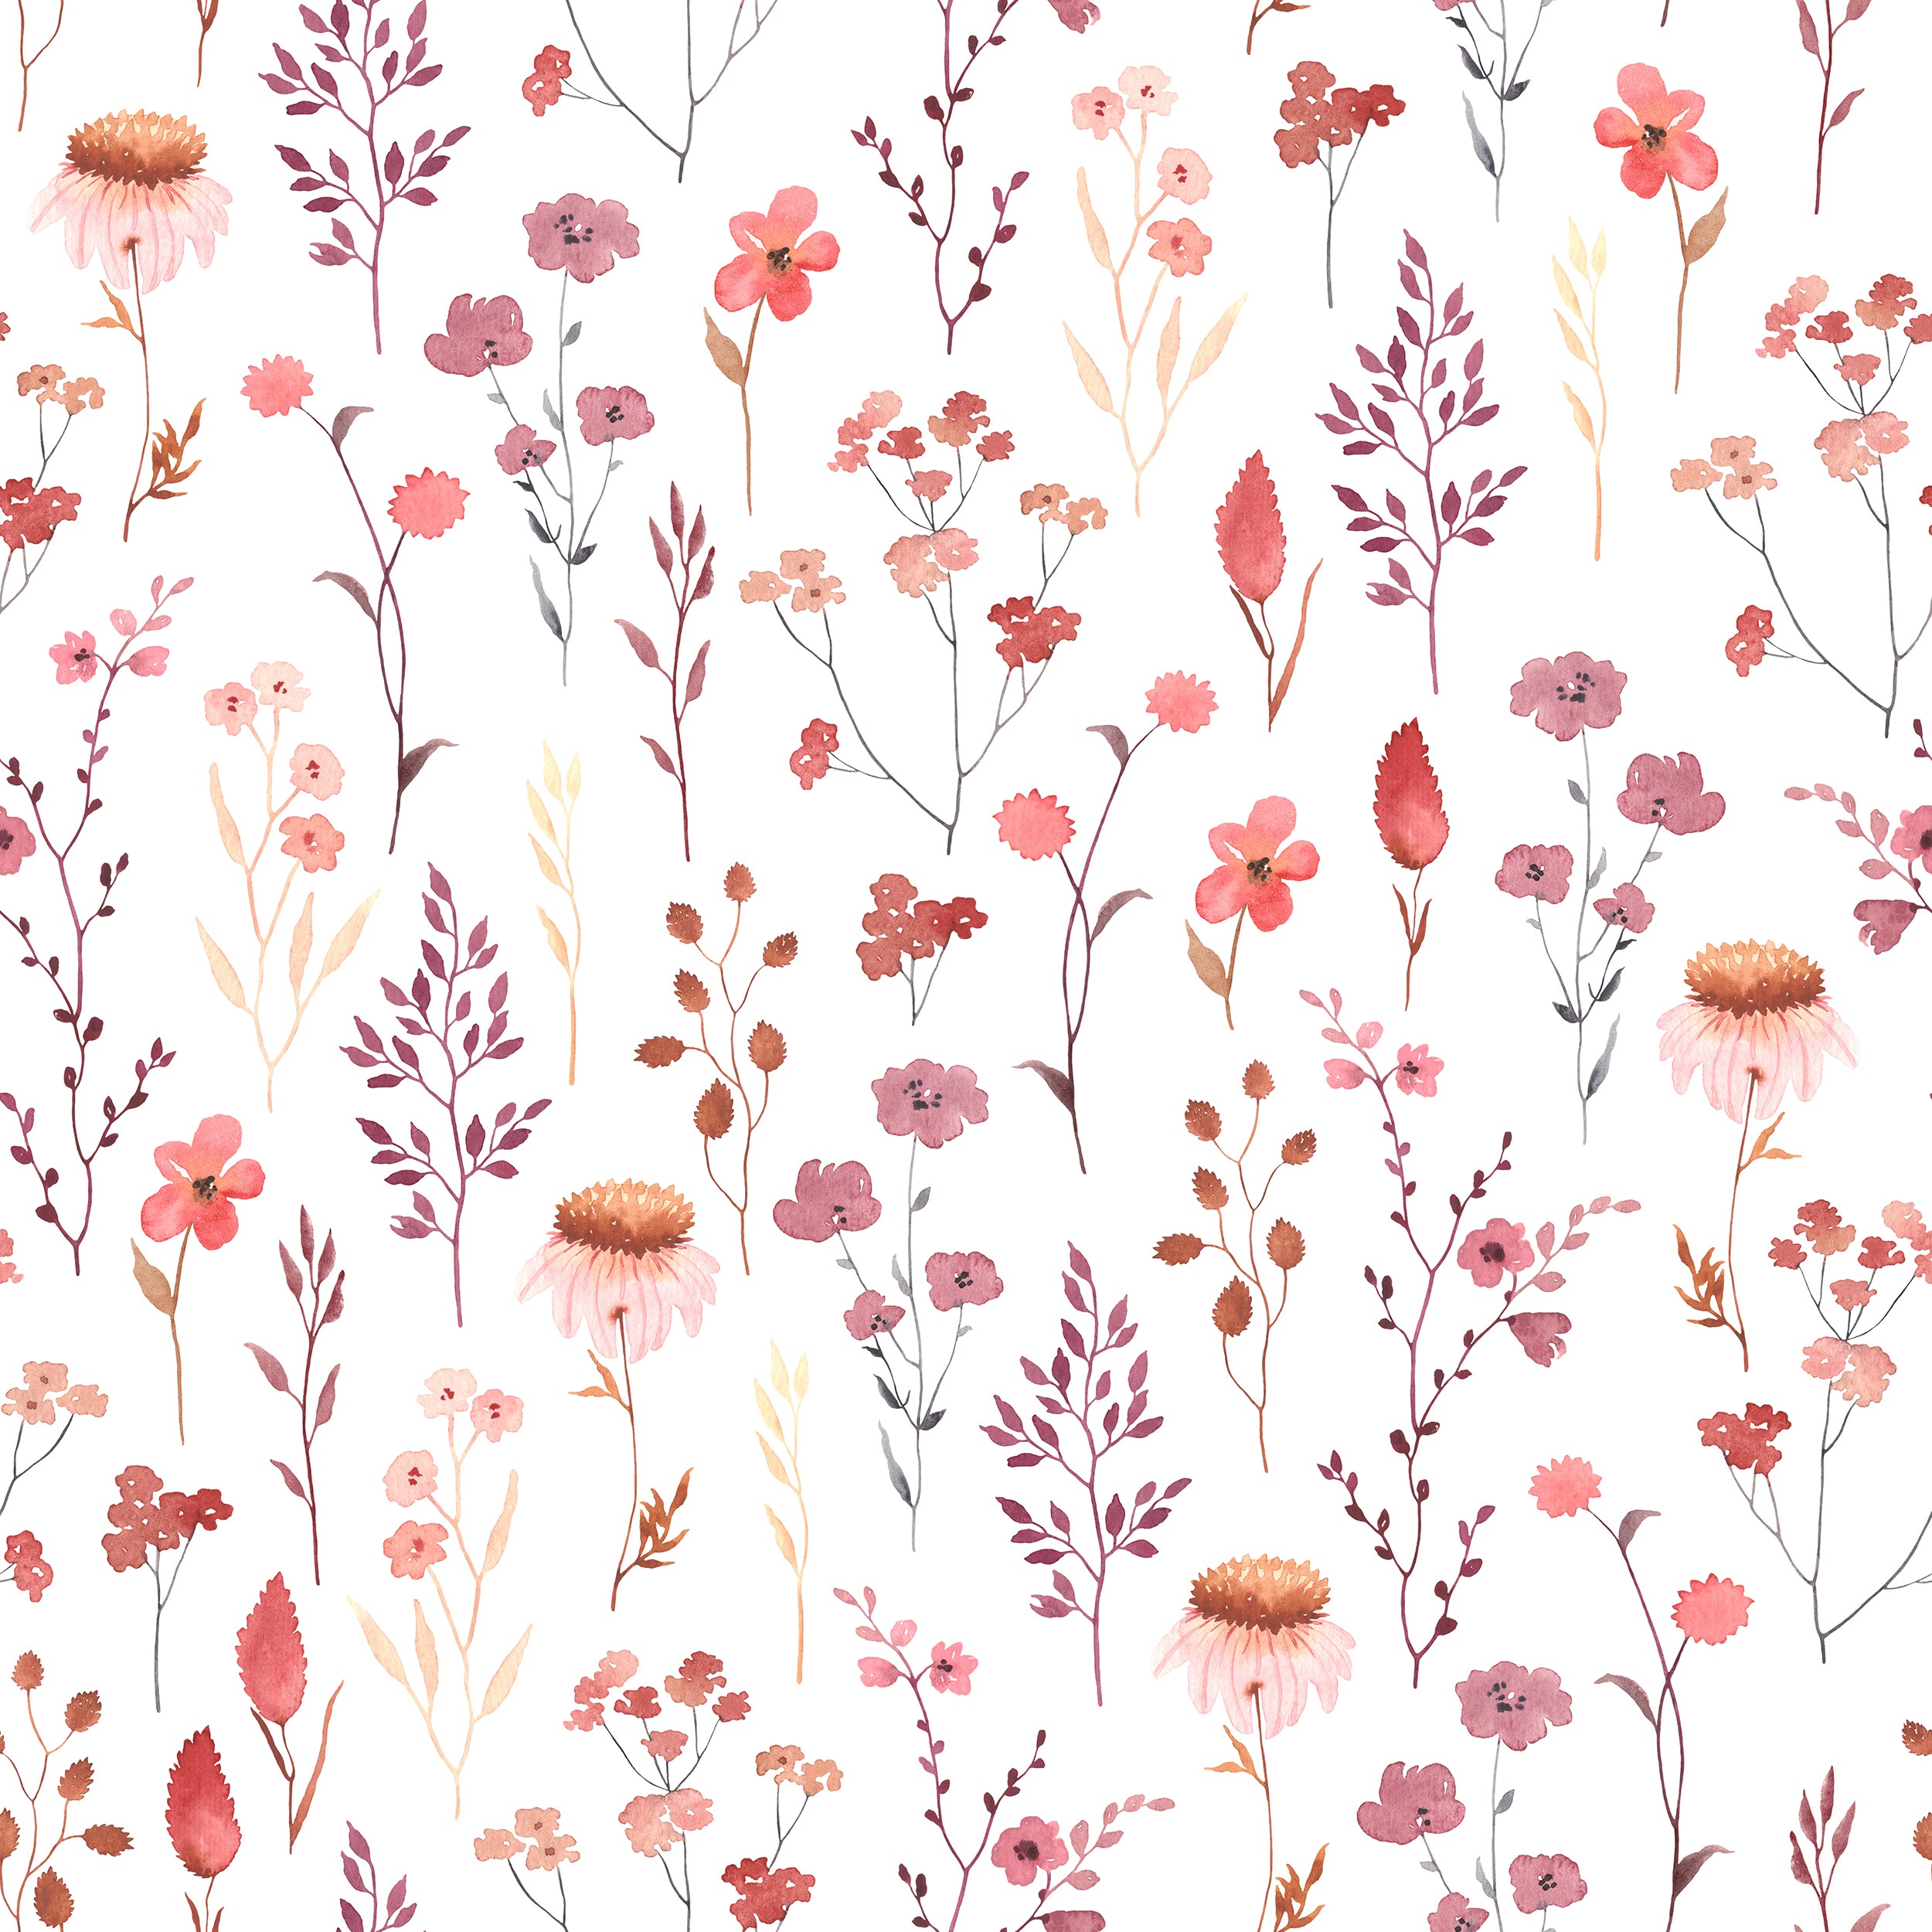 Close-up view of the Blushing Floral Wallpaper showcasing detailed floral patterns with a variety of flowers and leaves in shades of pink, red, and purple on a soft cream backdrop, providing a charming and romantic aesthetic.